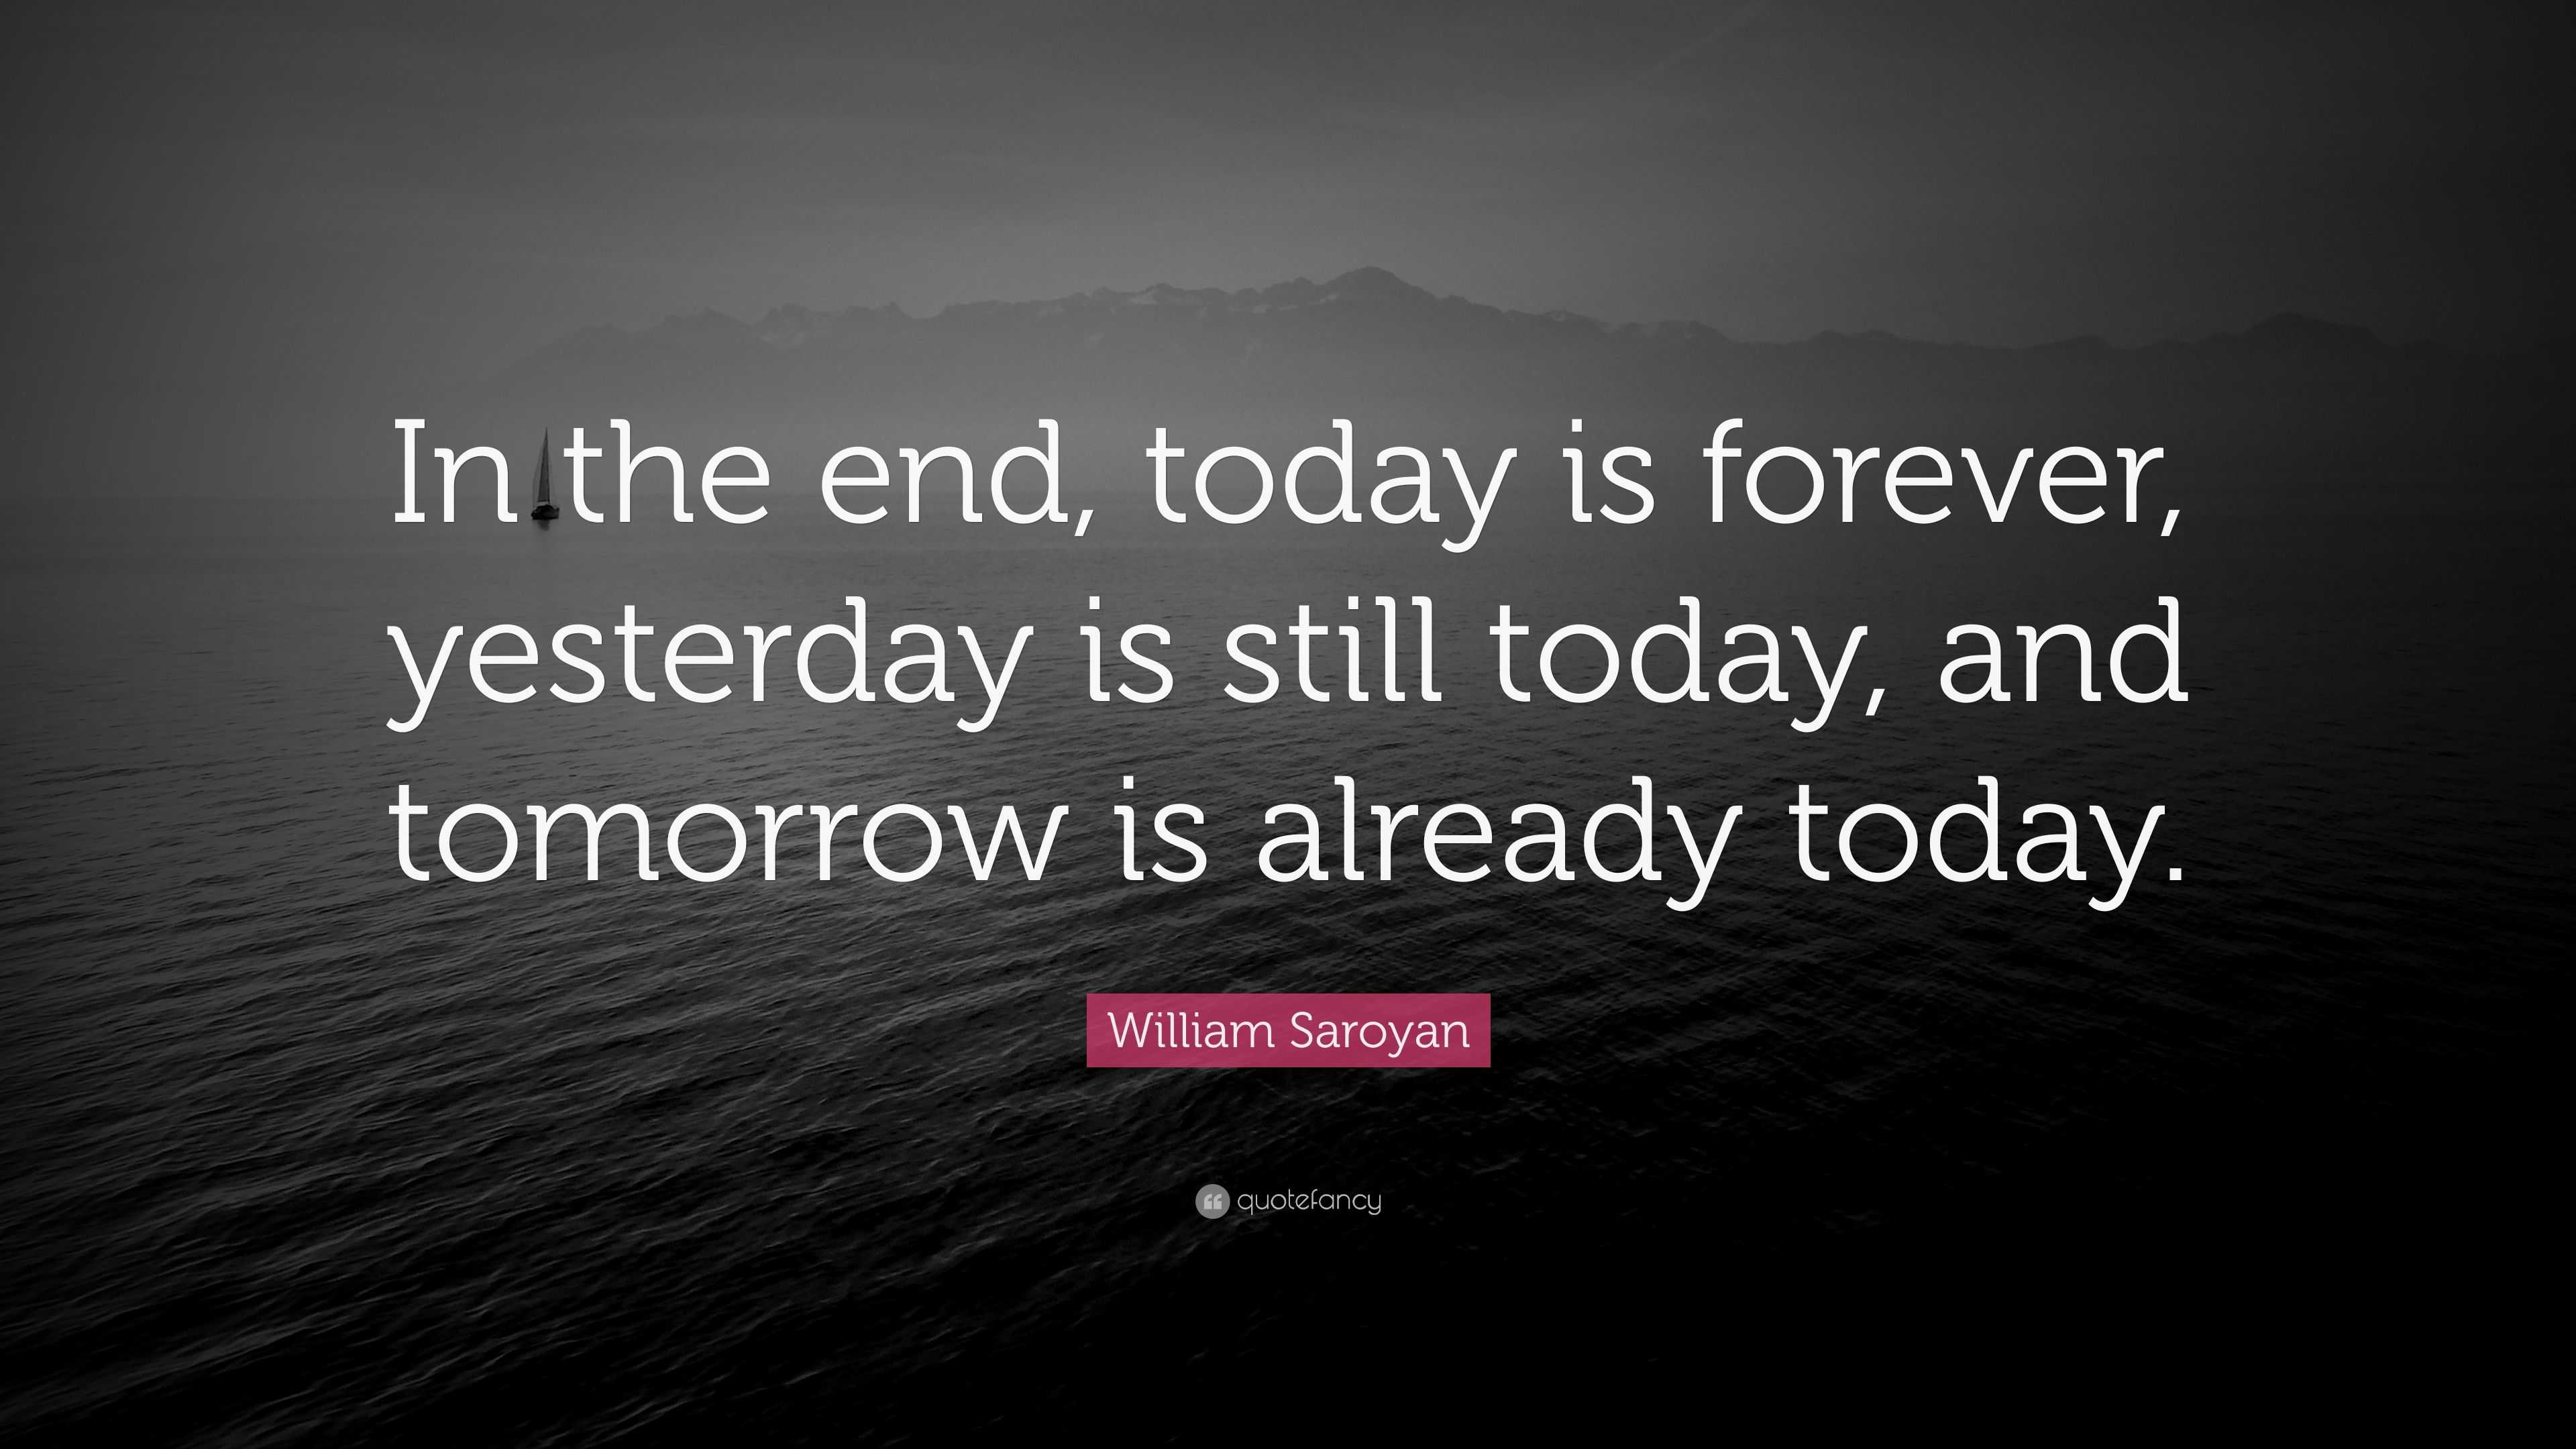 William Saroyan Quote: “In the end